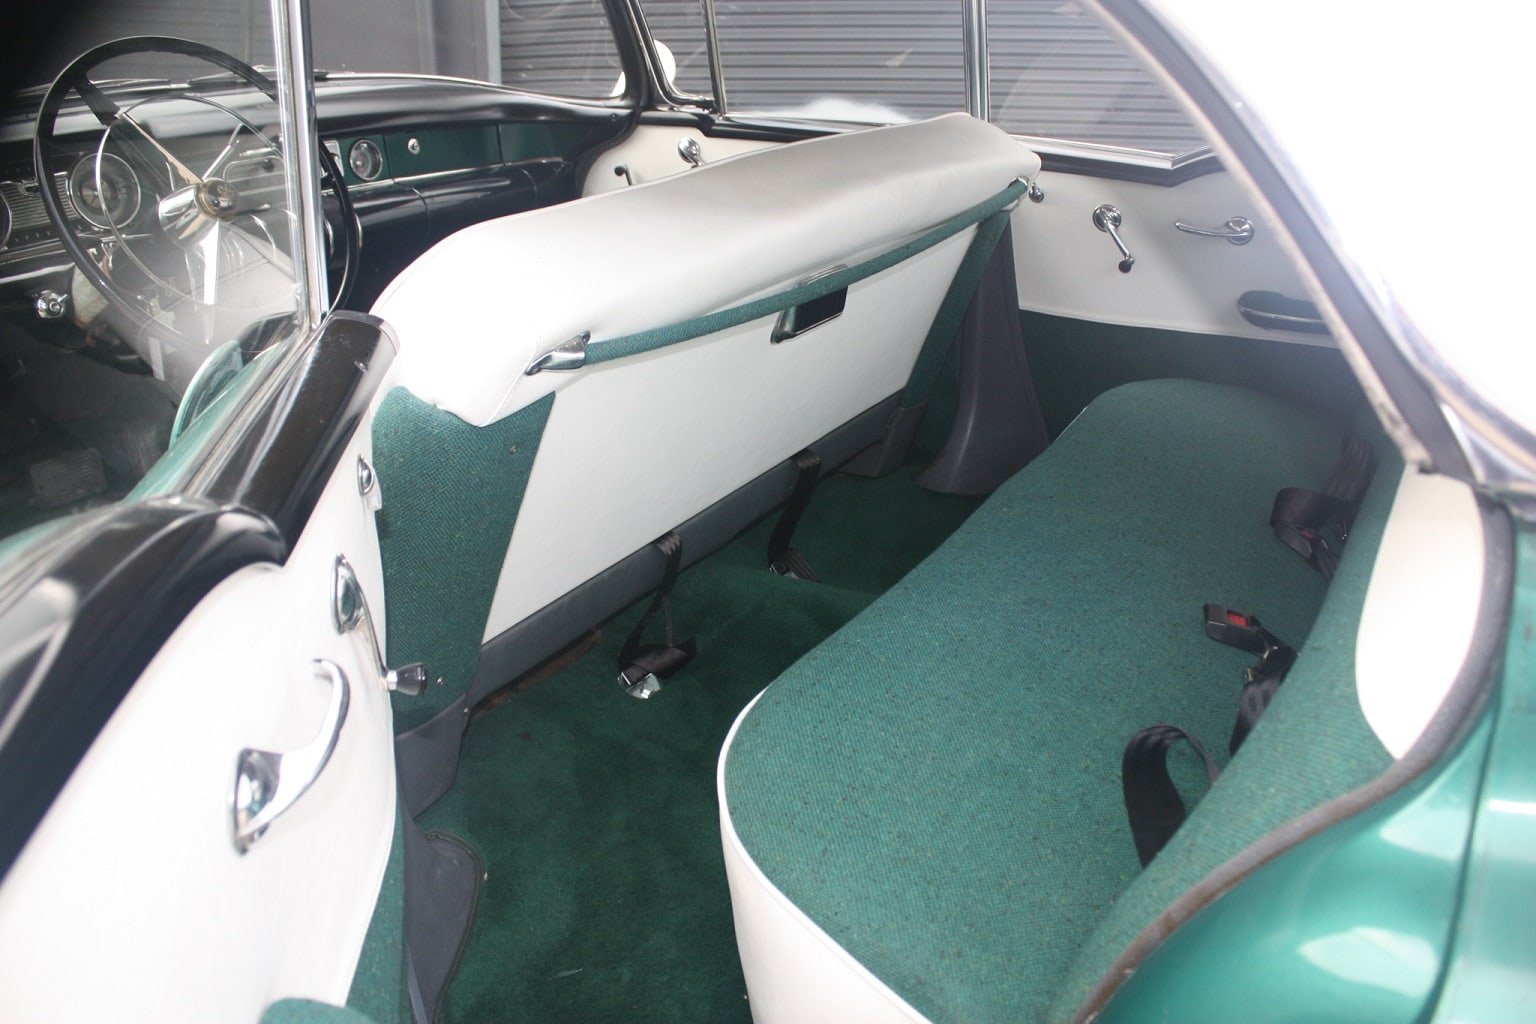 1955 Buick Special green